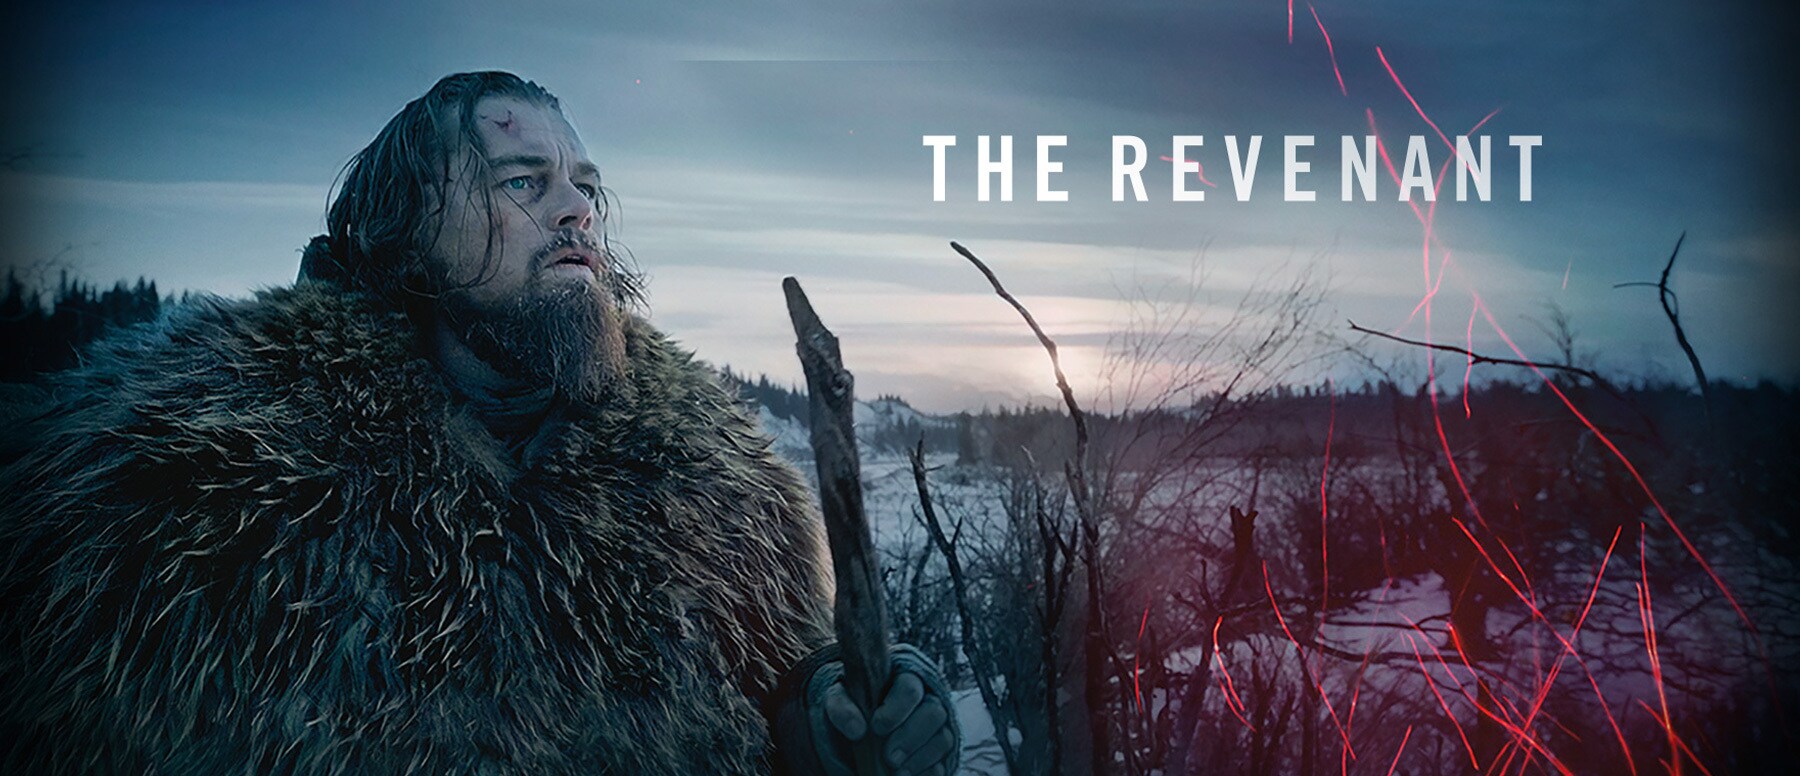 38-facts-about-the-movie-the-revenant